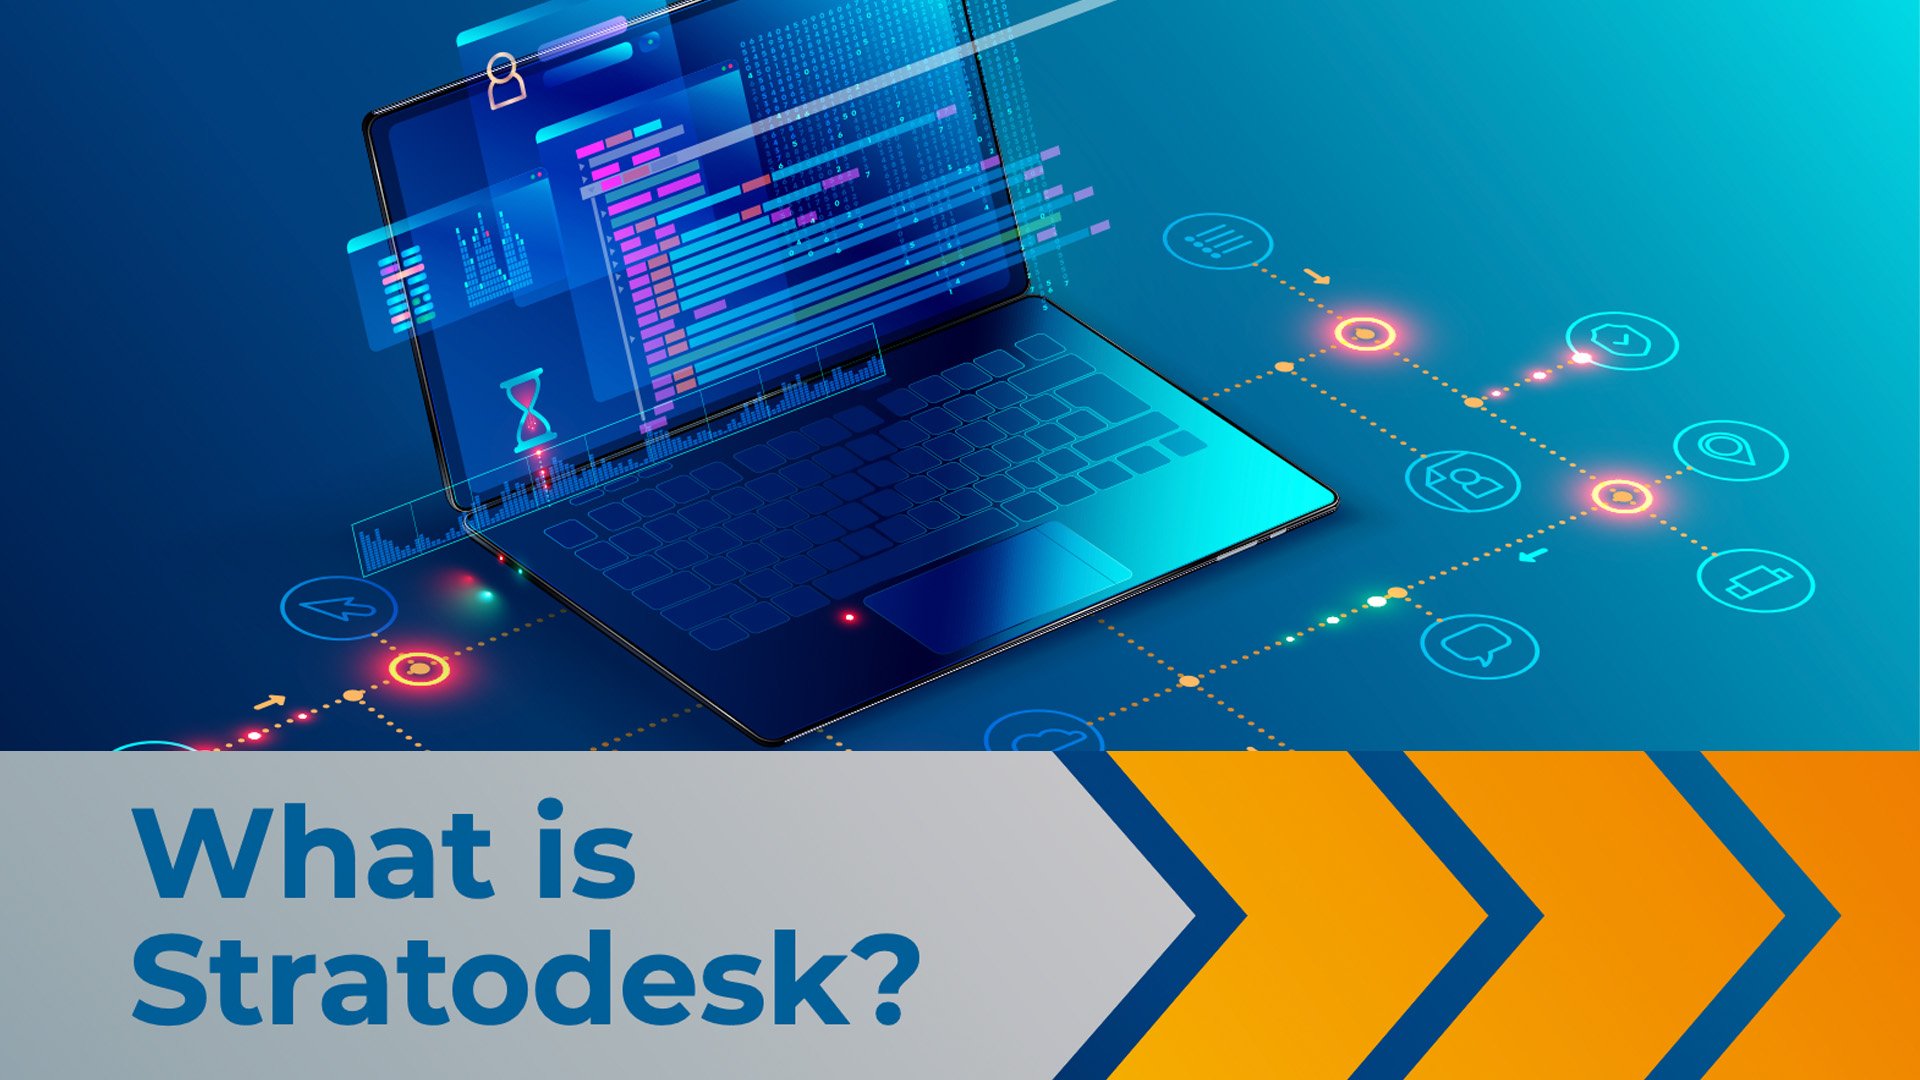 Who is Stratodesk?